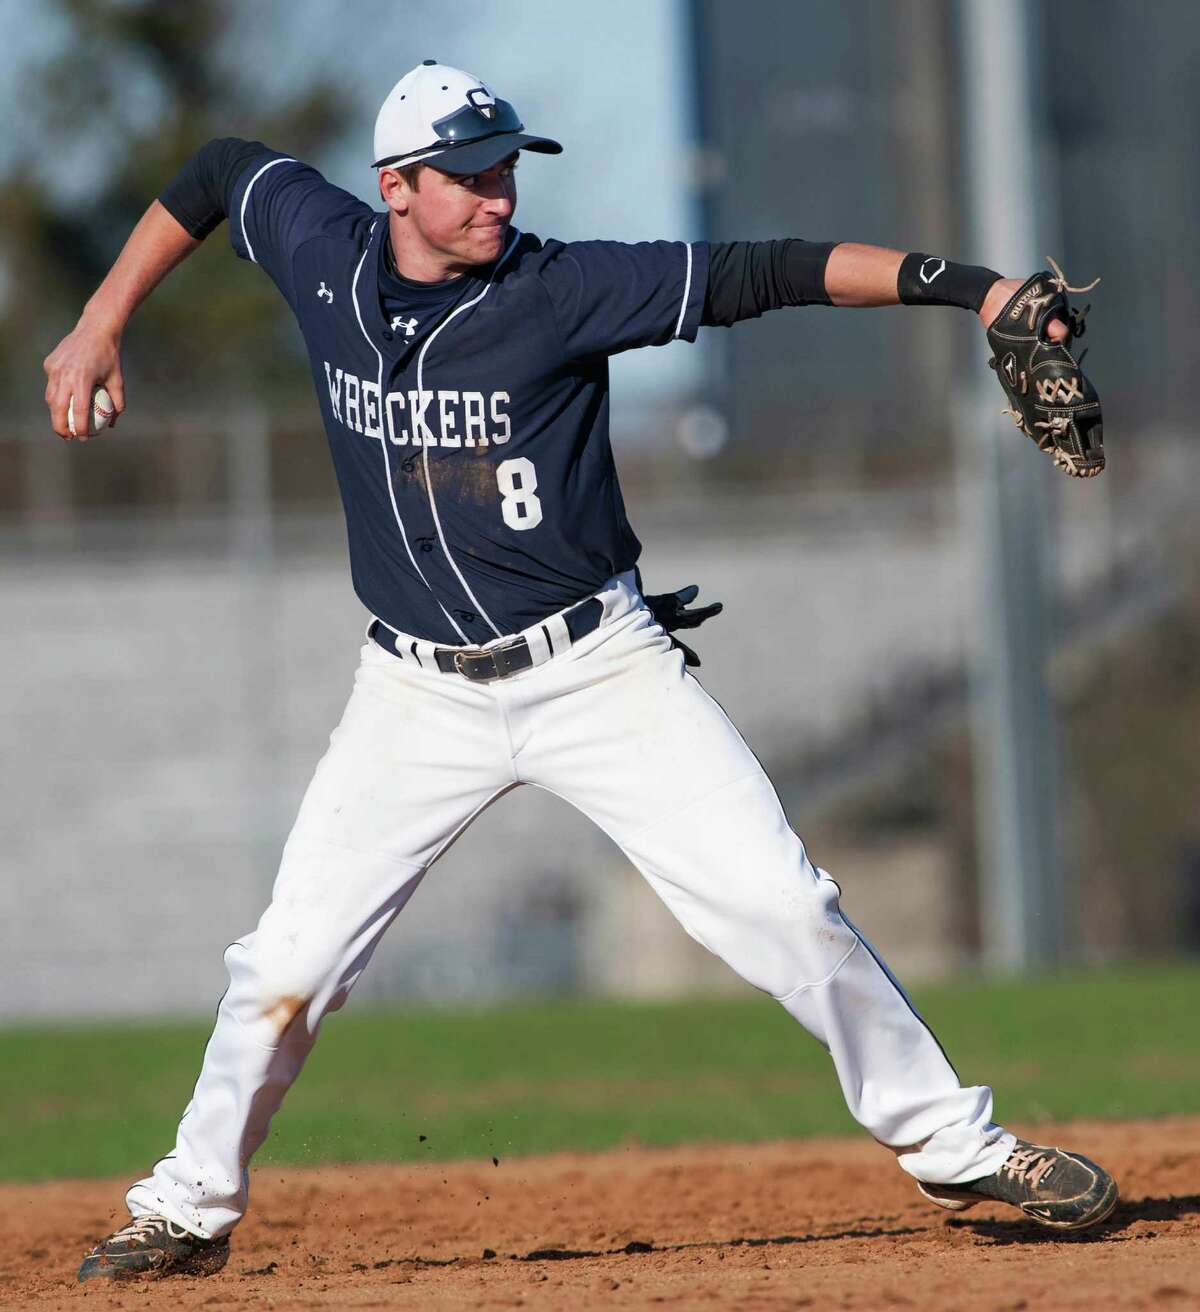 As one of the FCIAC's top defensive shortstops, Ellinwood anchored a Wreckers' team that went 17-4, finishing in first place in the FCIAC regular season. ... Ellinwood hit .410 with 28 hits, three home runs, 15 RBIs and six stolen bases. ... Named first-team All-FCIAC.